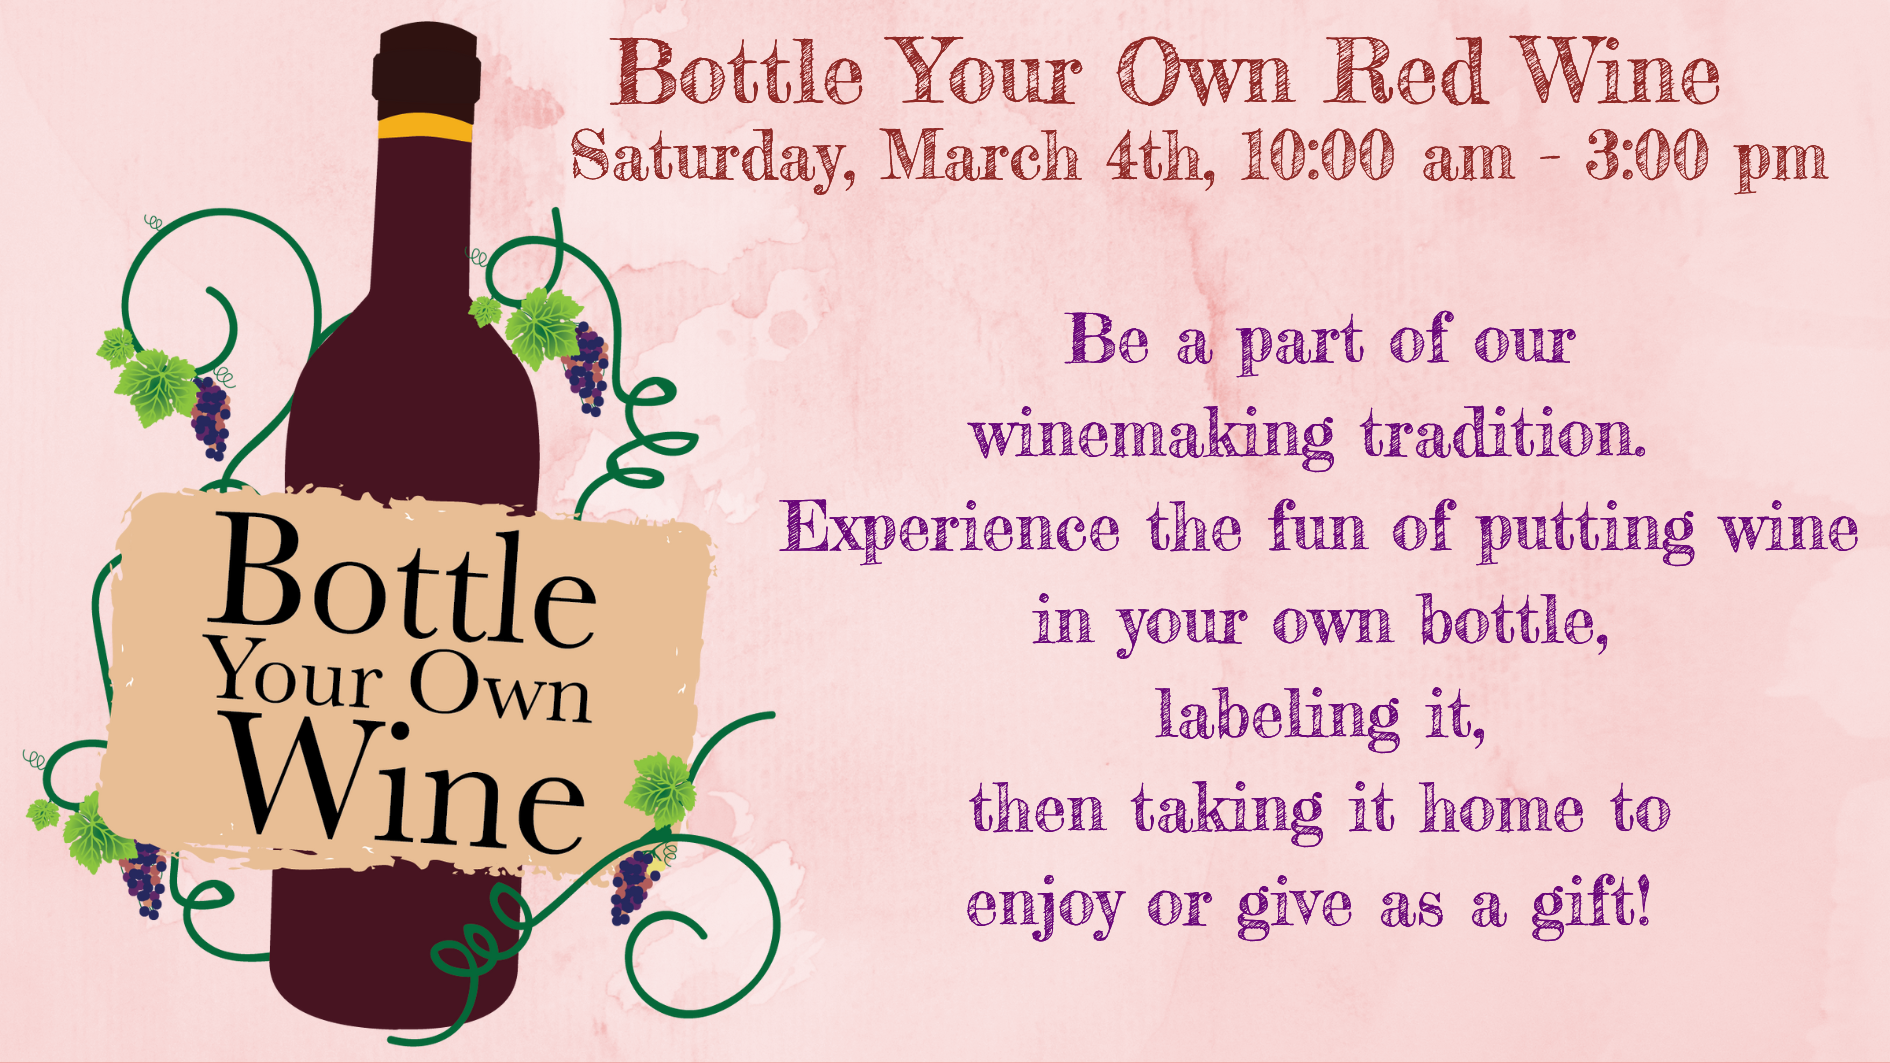 Bottle your Own Wine information